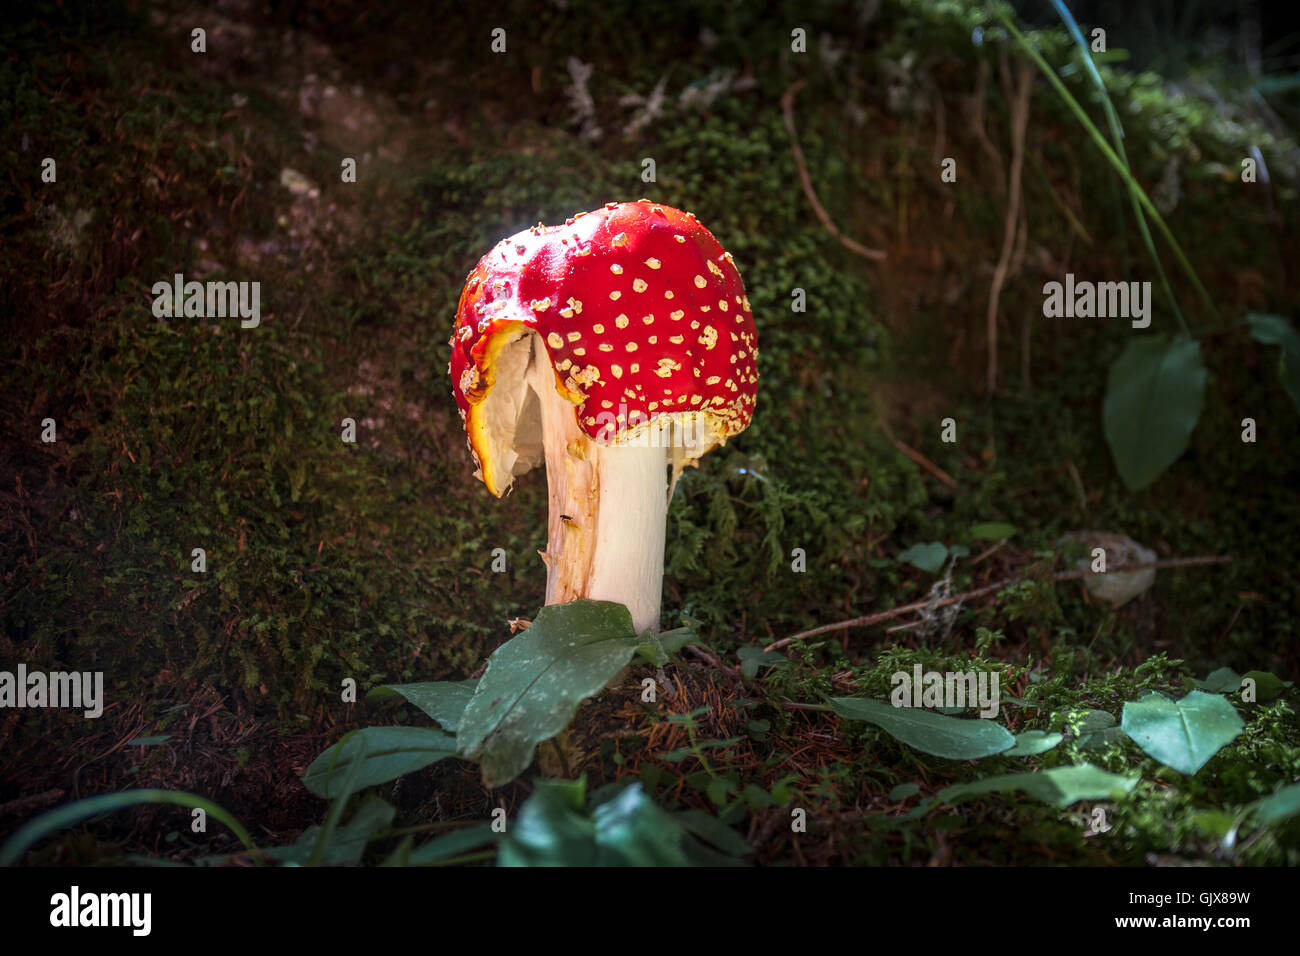 Amanita muscaria, red mushroom in forest Banque D'Images